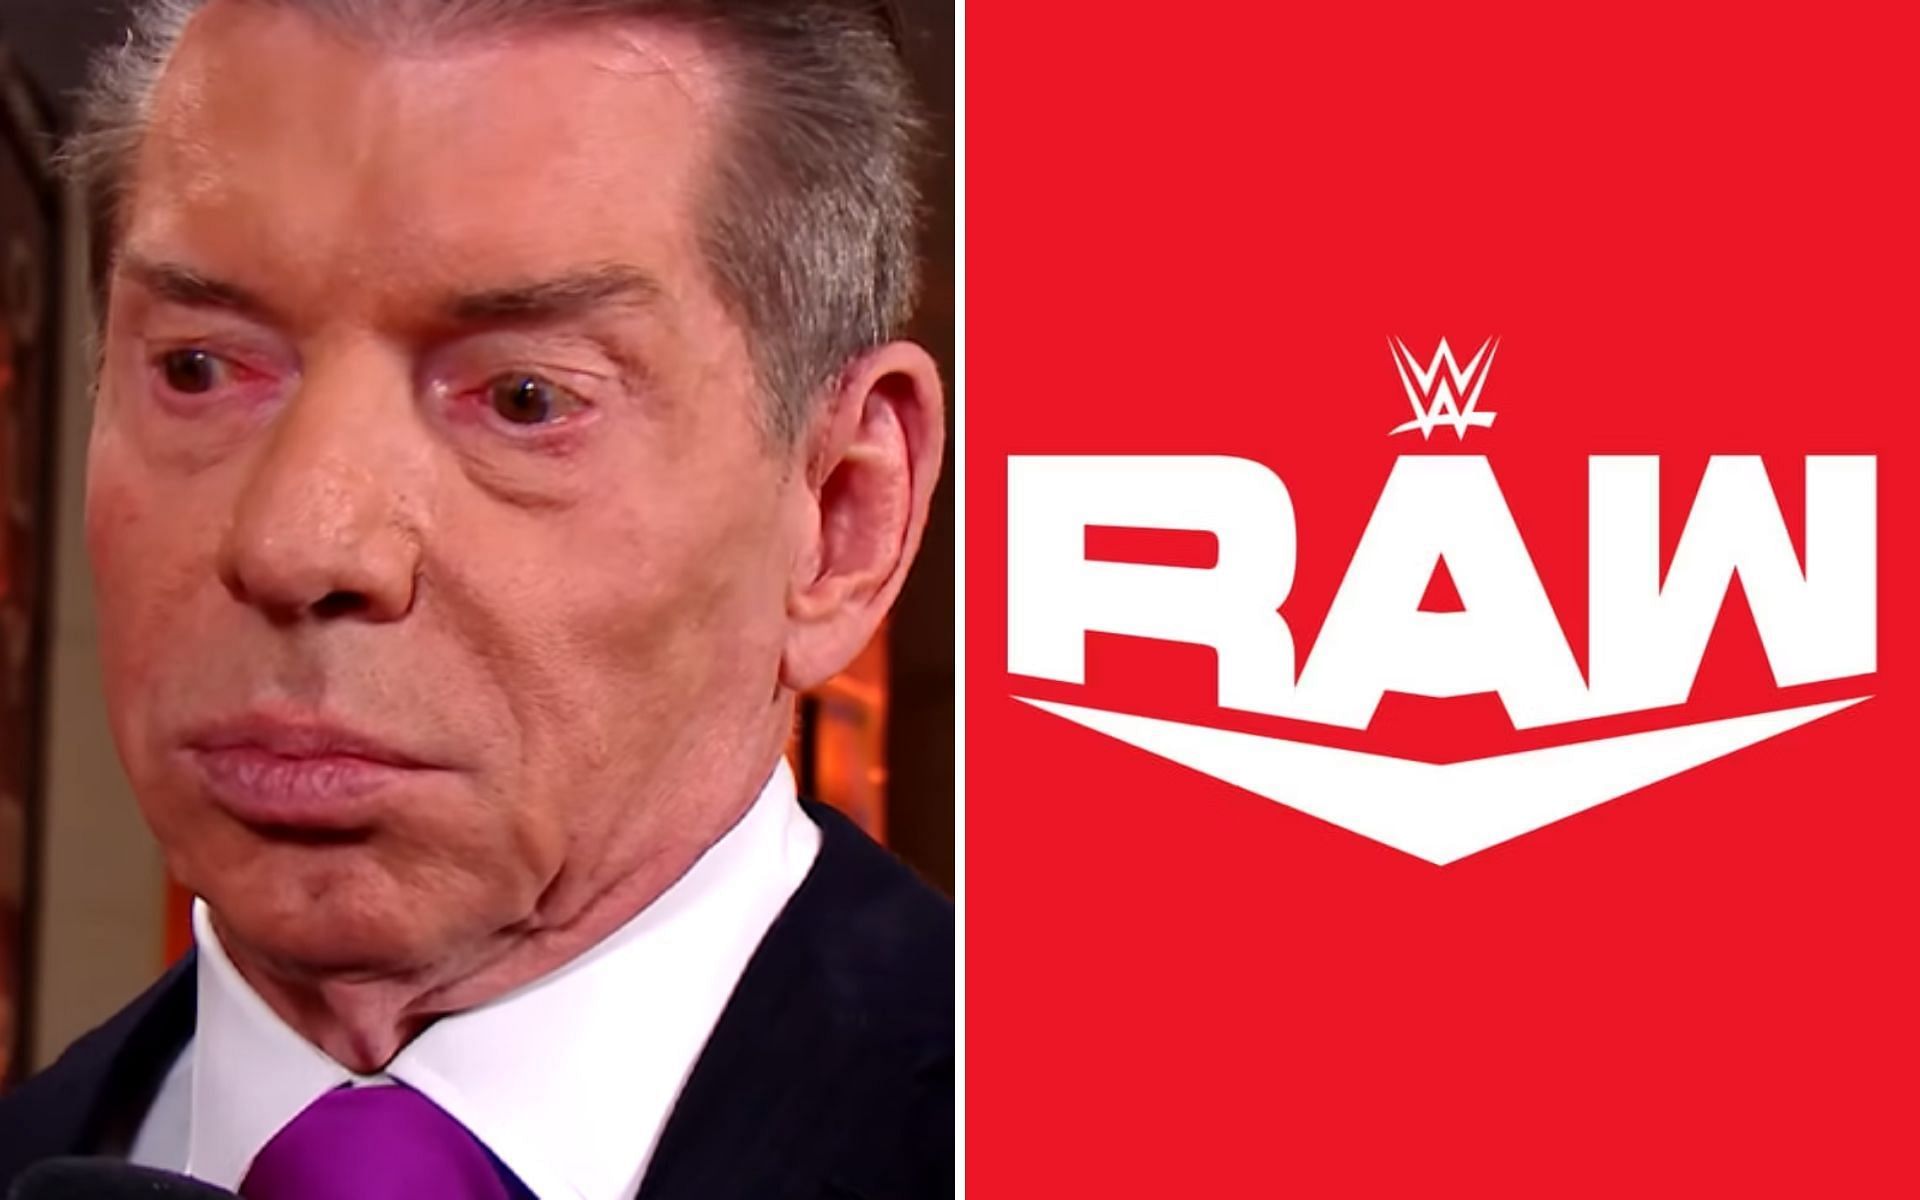 Vince McMahon was accused of ribbing the RAW star